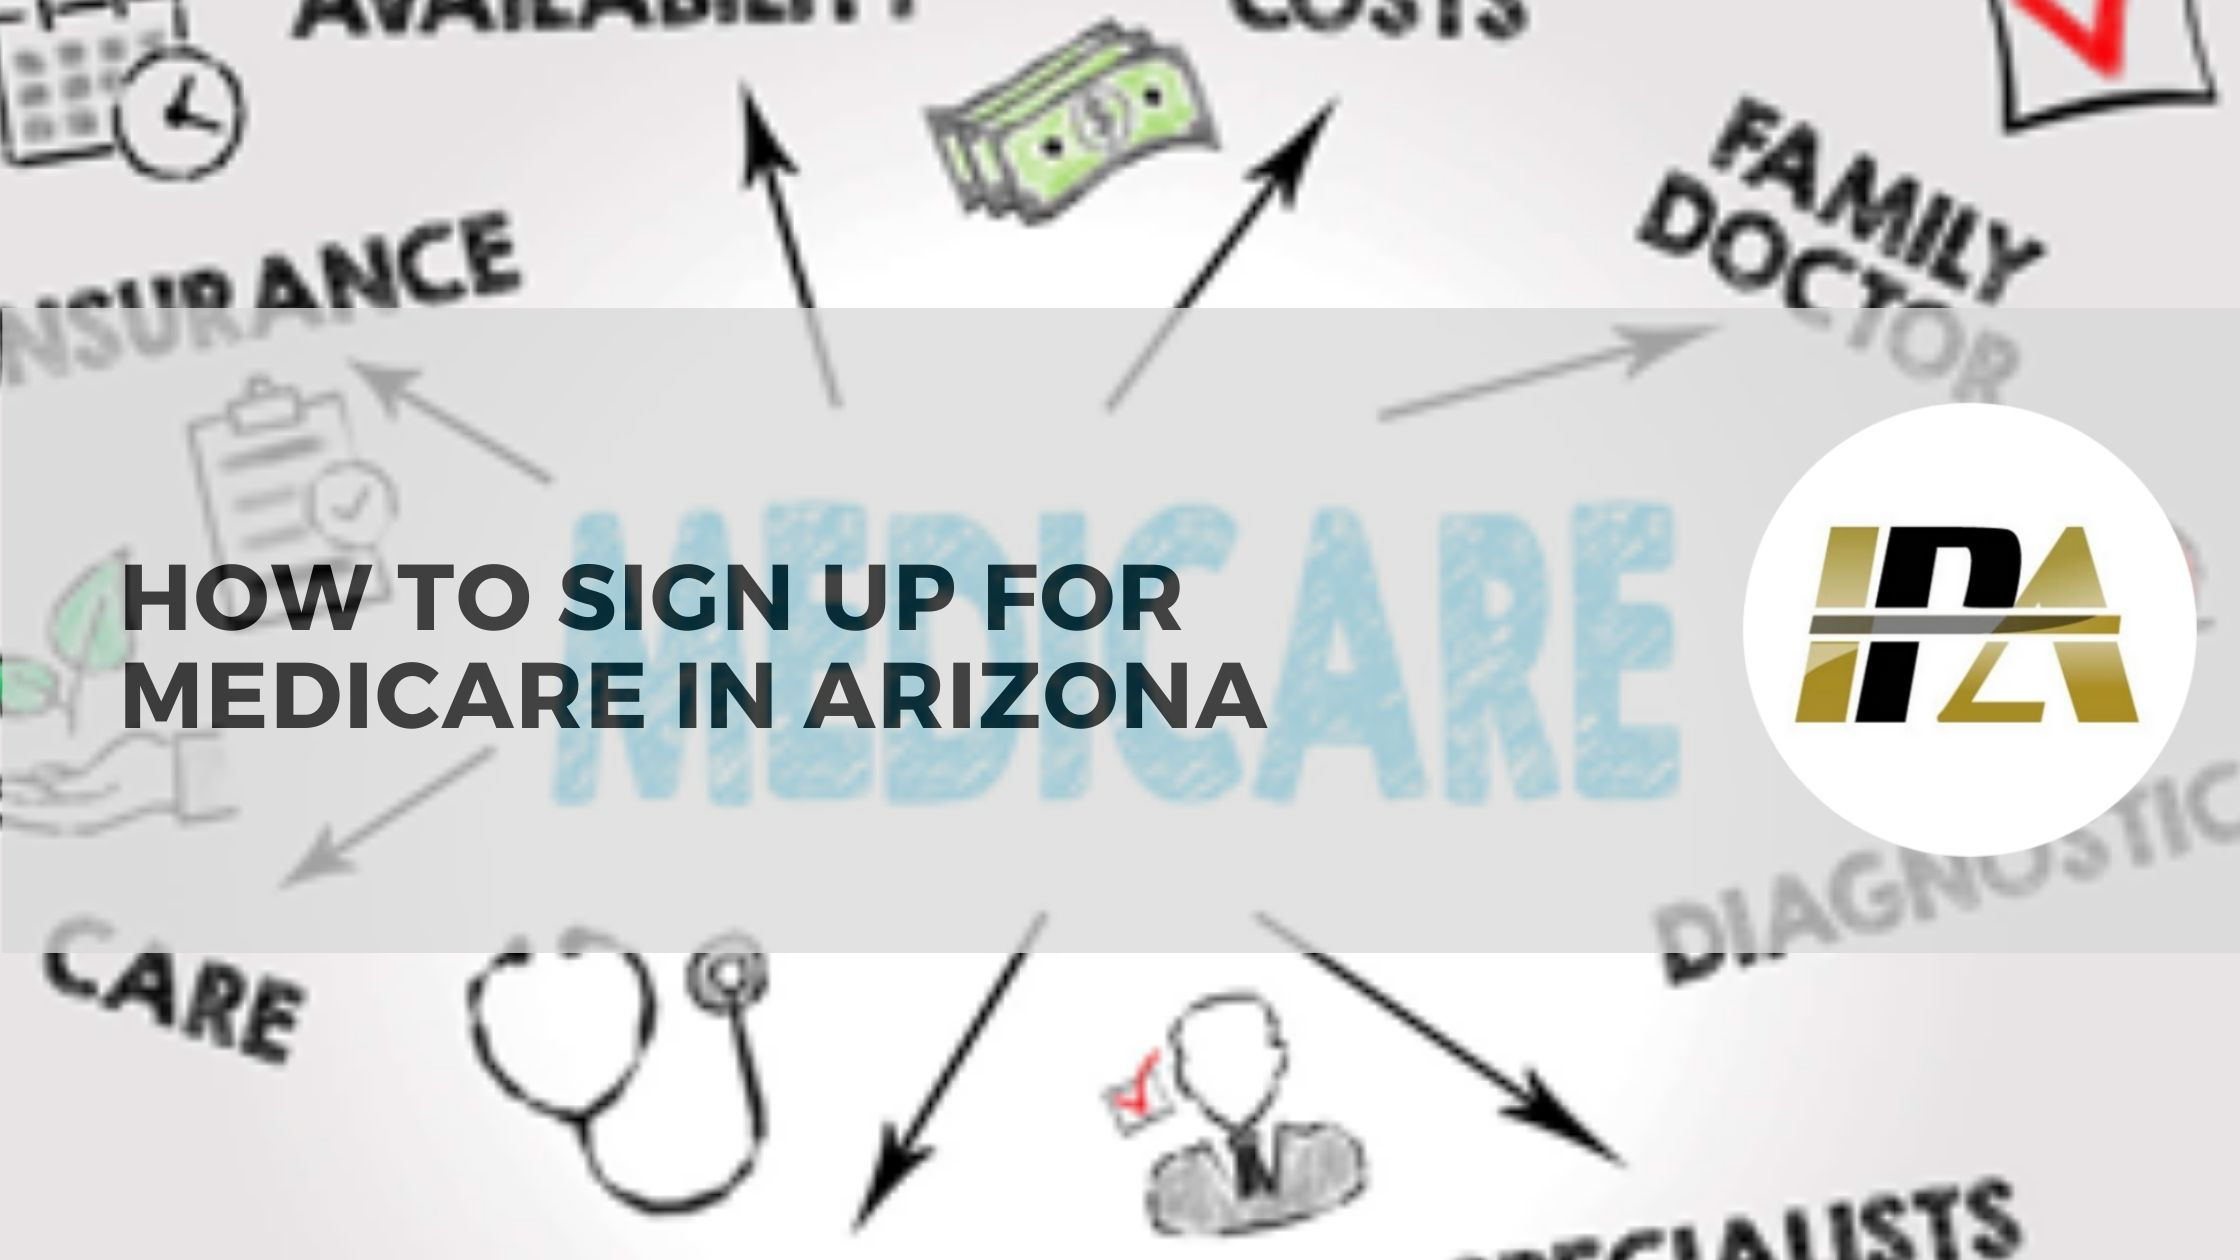 How to Sign Up for Medicare in Arizona